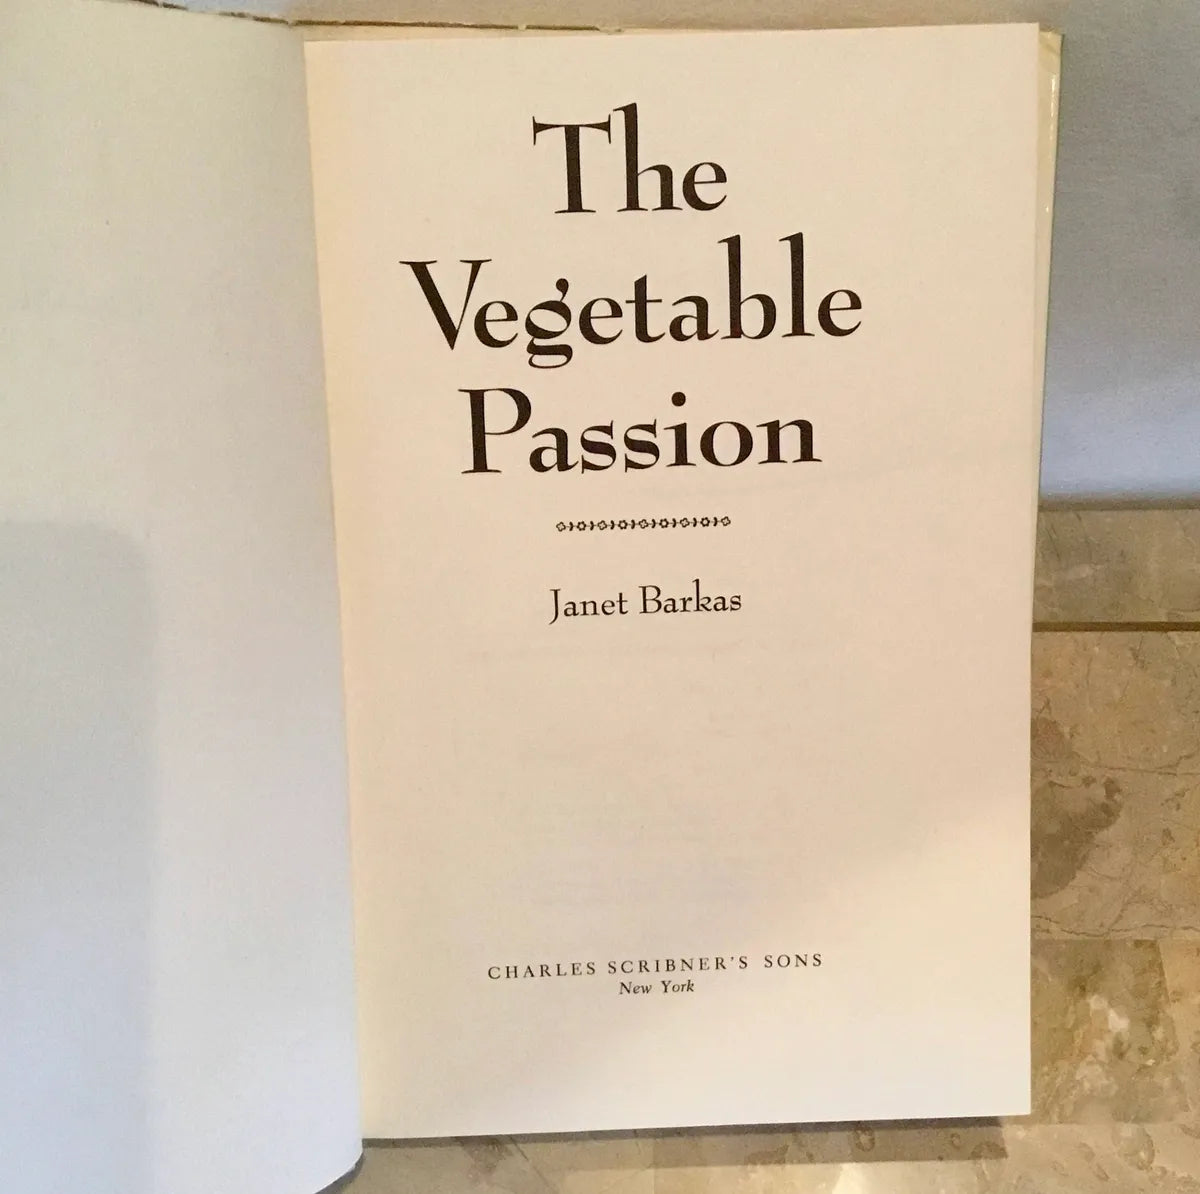 THE VEGETABLE PASSION (1975) by Janet Barkas, Vegetarianism in History, Vintage Book